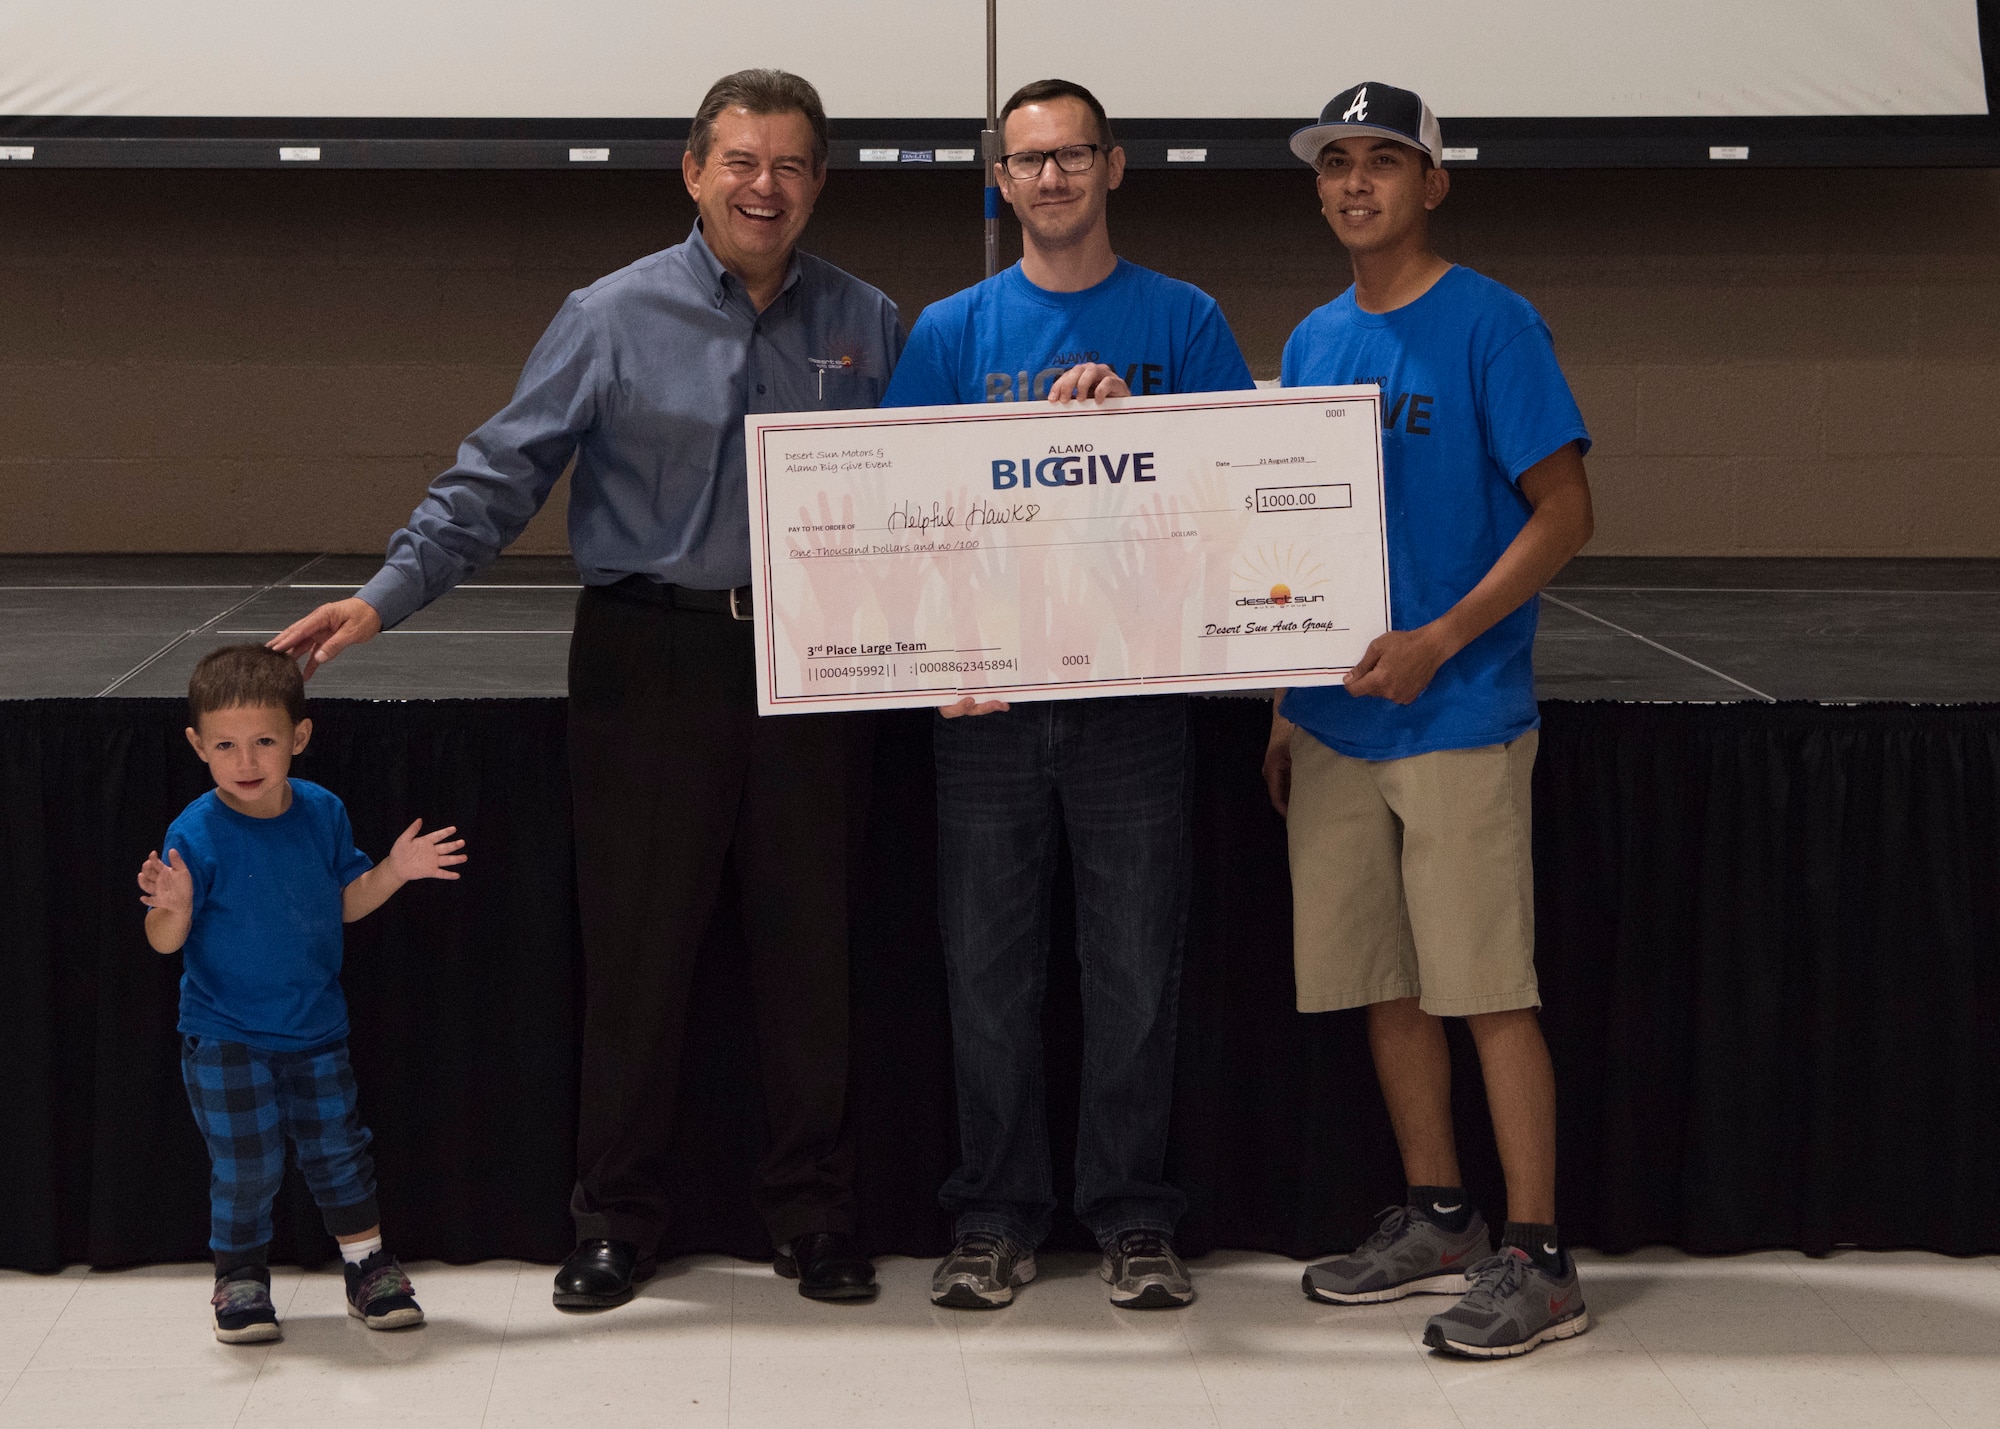 Members of team Helpful Hawks accept a check for winning the 3rd place in the large team category as part of the 2019 Alamo’s Big Give closing ceremony, August 22, at the Willie Estrada Civic Center in Alamogordo, N.M. This was the 12th year of Alamo’s Big Give which has saved the Otero community over $2,000,000 through community service. (U.S. Air Force photo by Staff Sgt. BreeAnn Sachs)